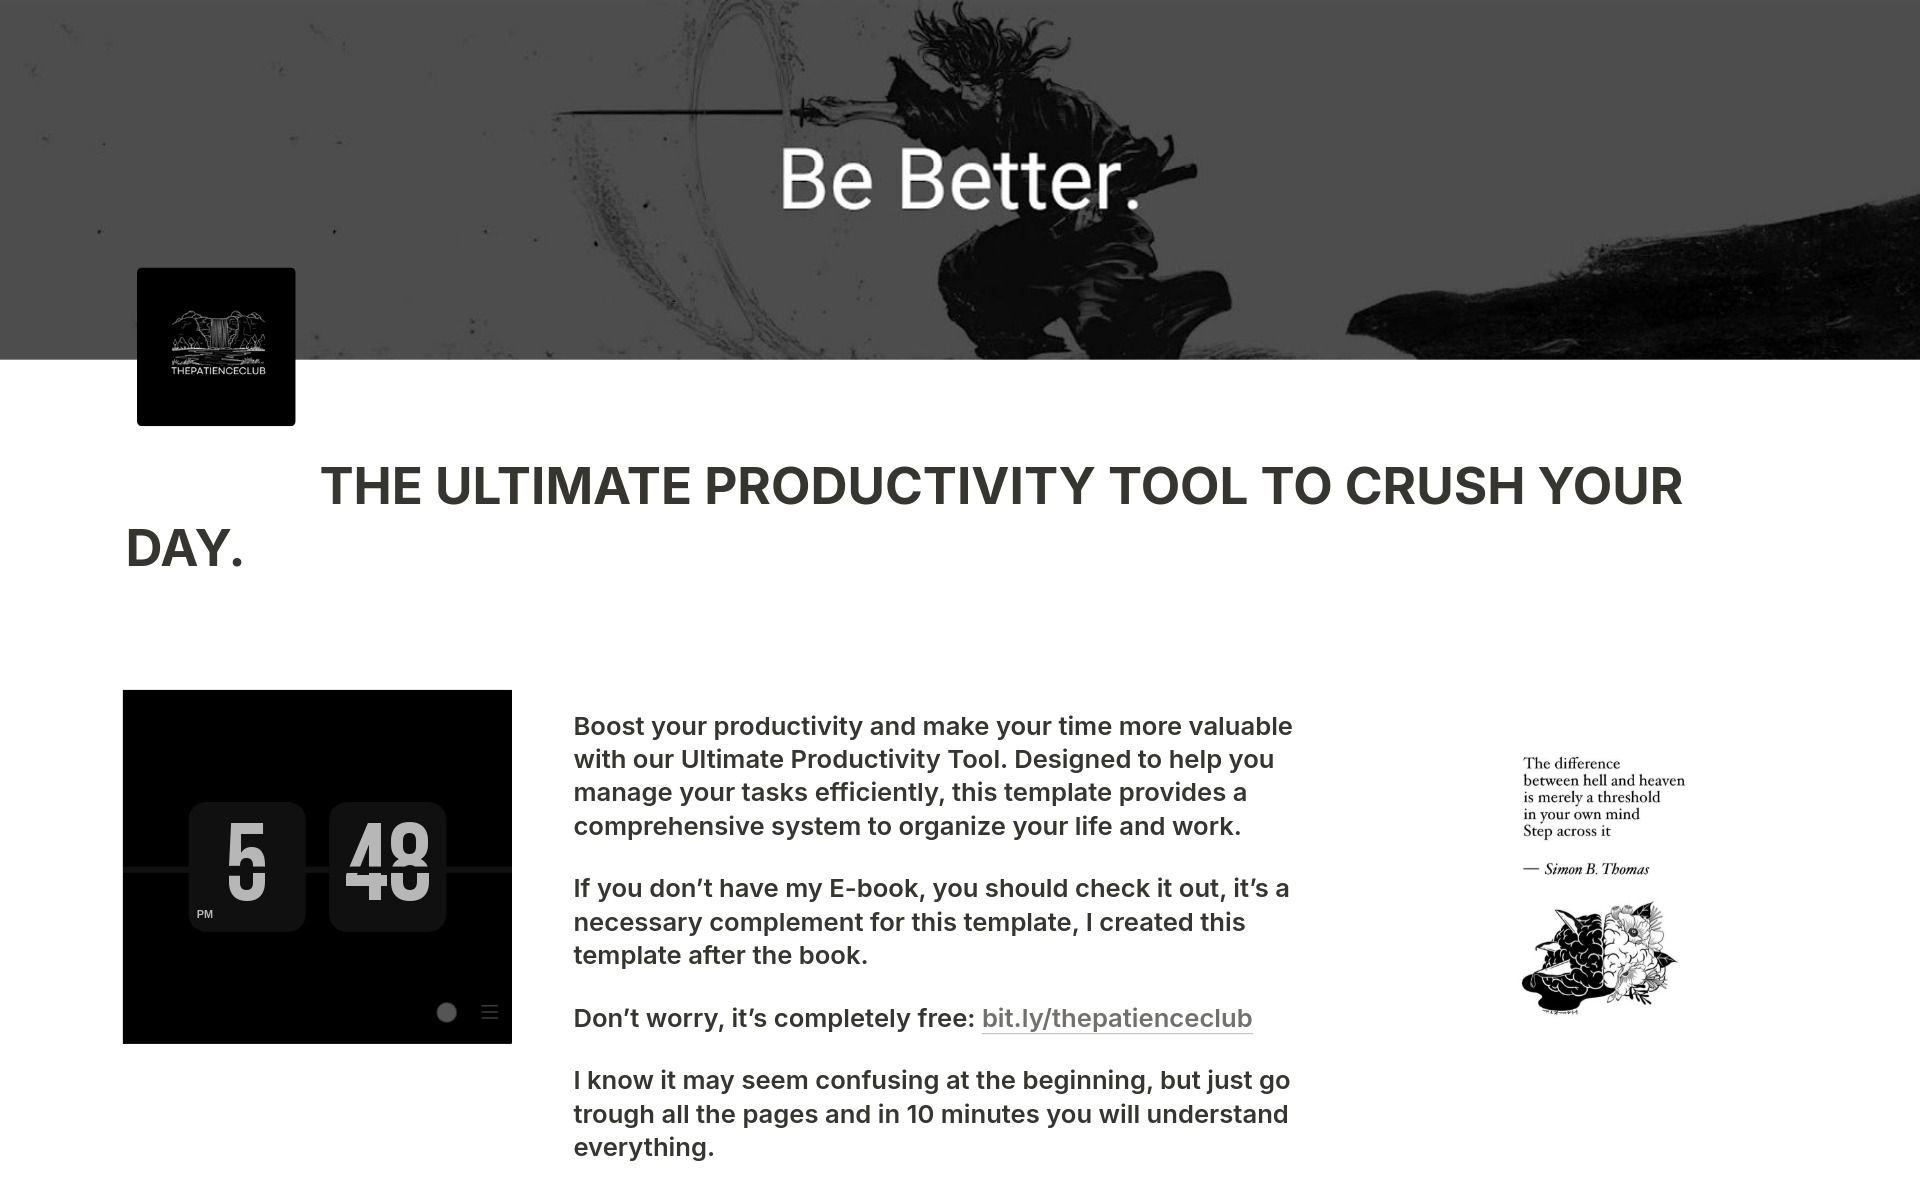 This template together with my FREE E-BOOK are the only tools you need to improve your productivity, i chose to keep it simple, because at the end, it's all about not wasting valuable energy.